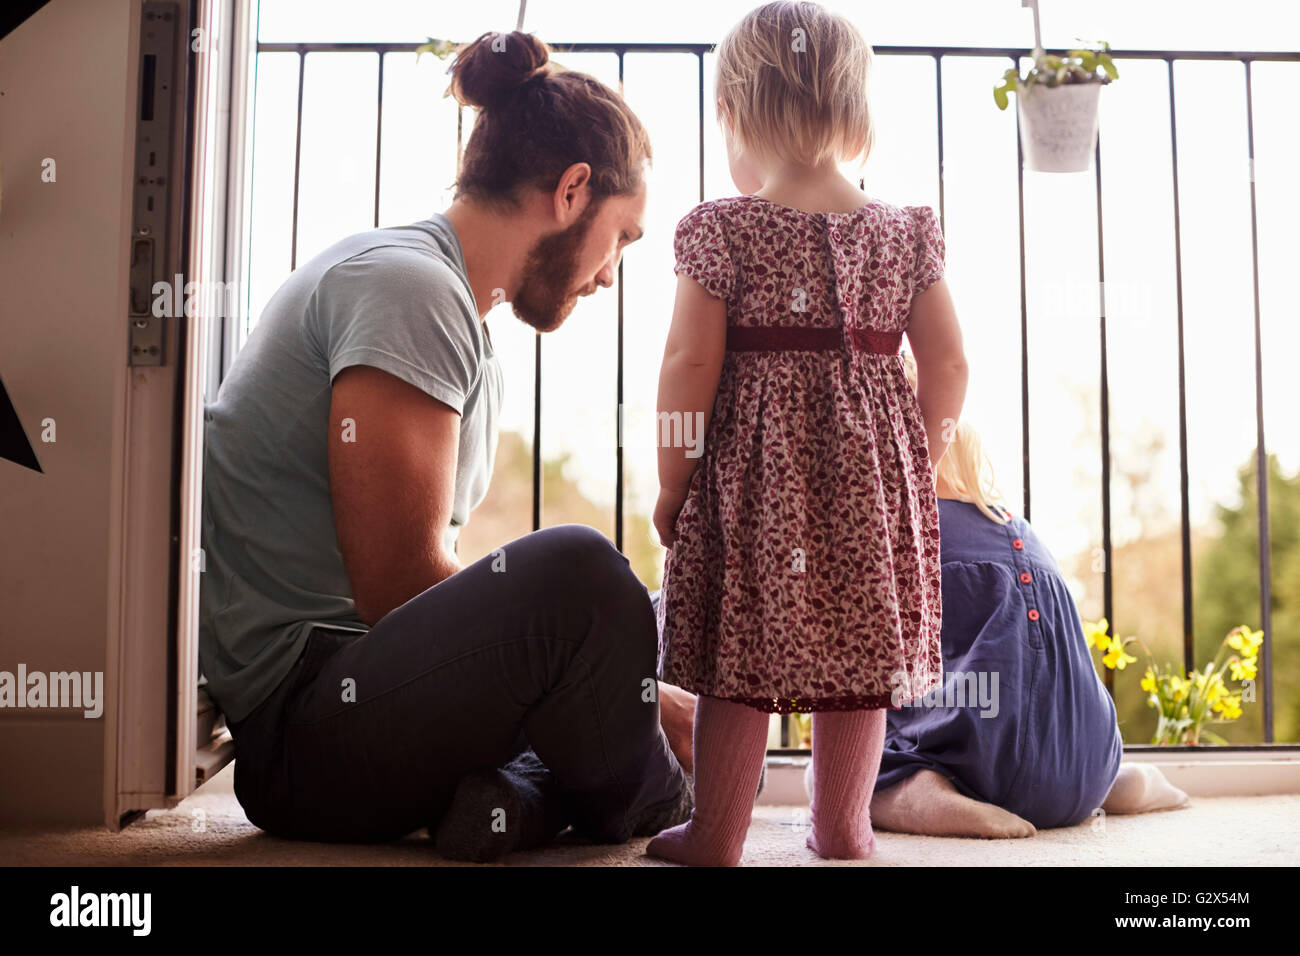 Father With Children At Home Watering Plants On Balcony Stock Photo